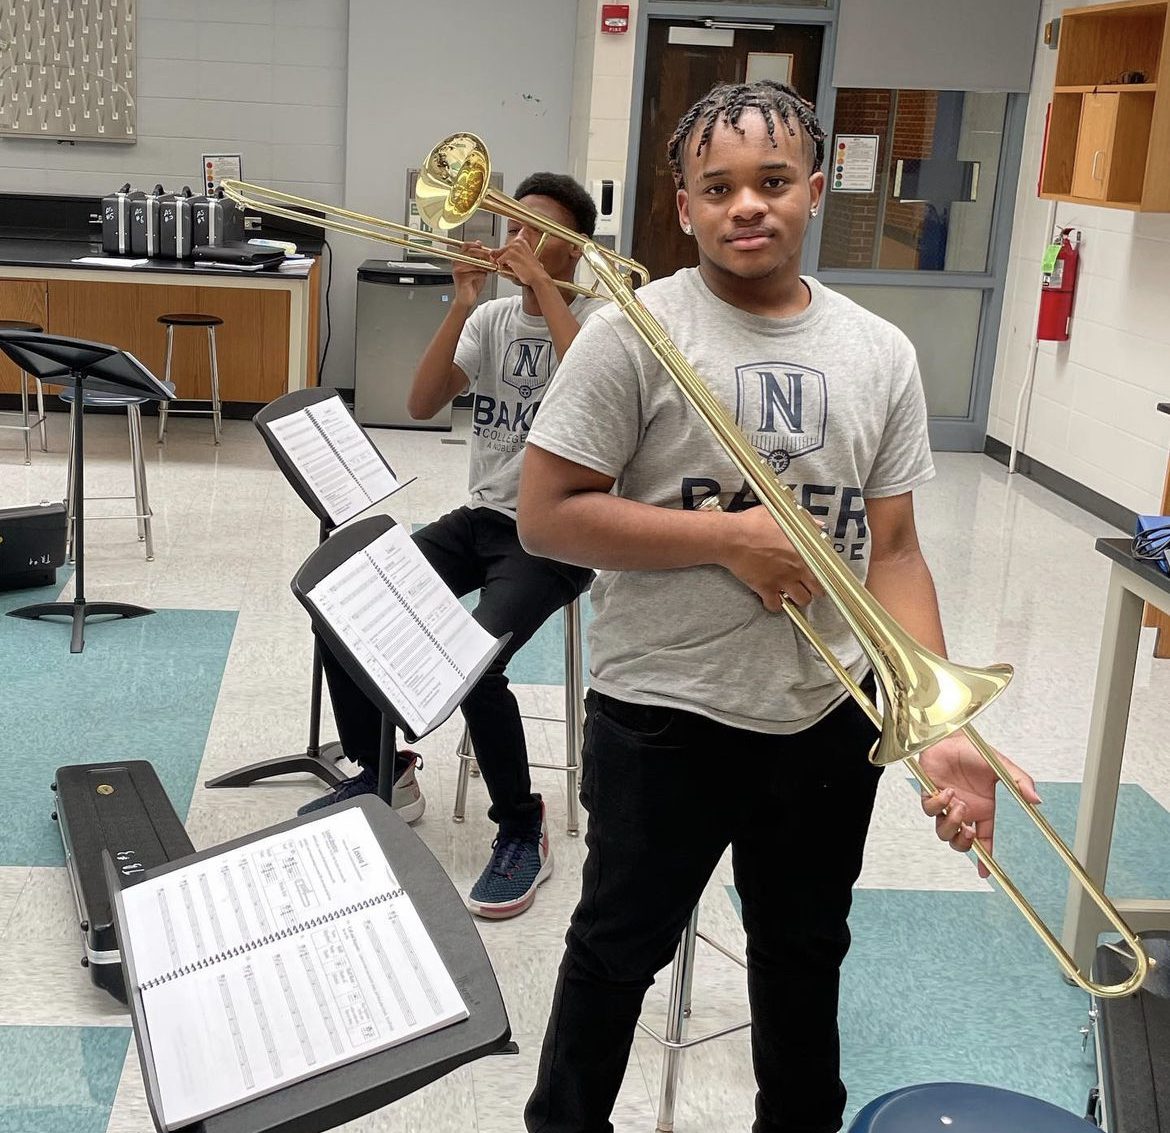 A student is standing holding their trumpet in their jazz class. The student is wearing a Baker graphic tee and black pants. The student is holding the trumpet with his right hand and left. The student is inside an orchestra/music room with music sheets on the stands. There is another student behind the first student but their face is not visible.